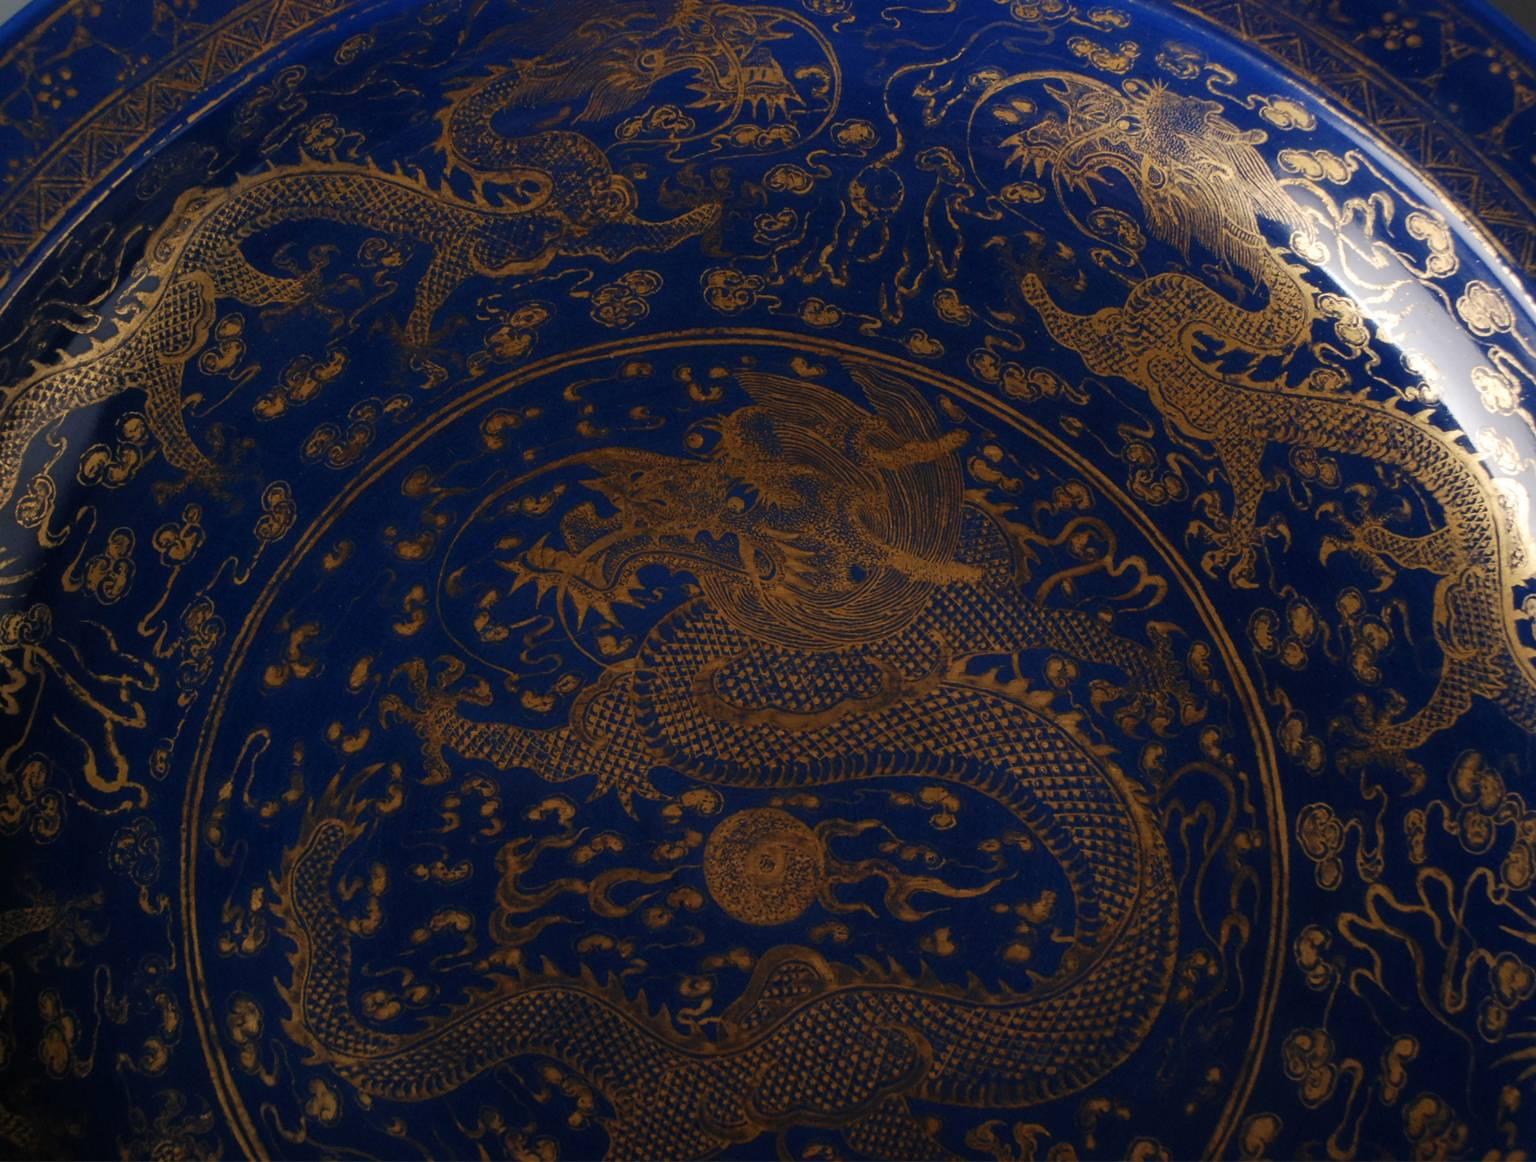 This Chinese porcelain charger is decorated in monochrome blue enamel, under glaze. The dragons’ decoration in gold is applied over the glaze. In China, the dragon is the symbol of the emperor, here depicted in the center and on the edge. These